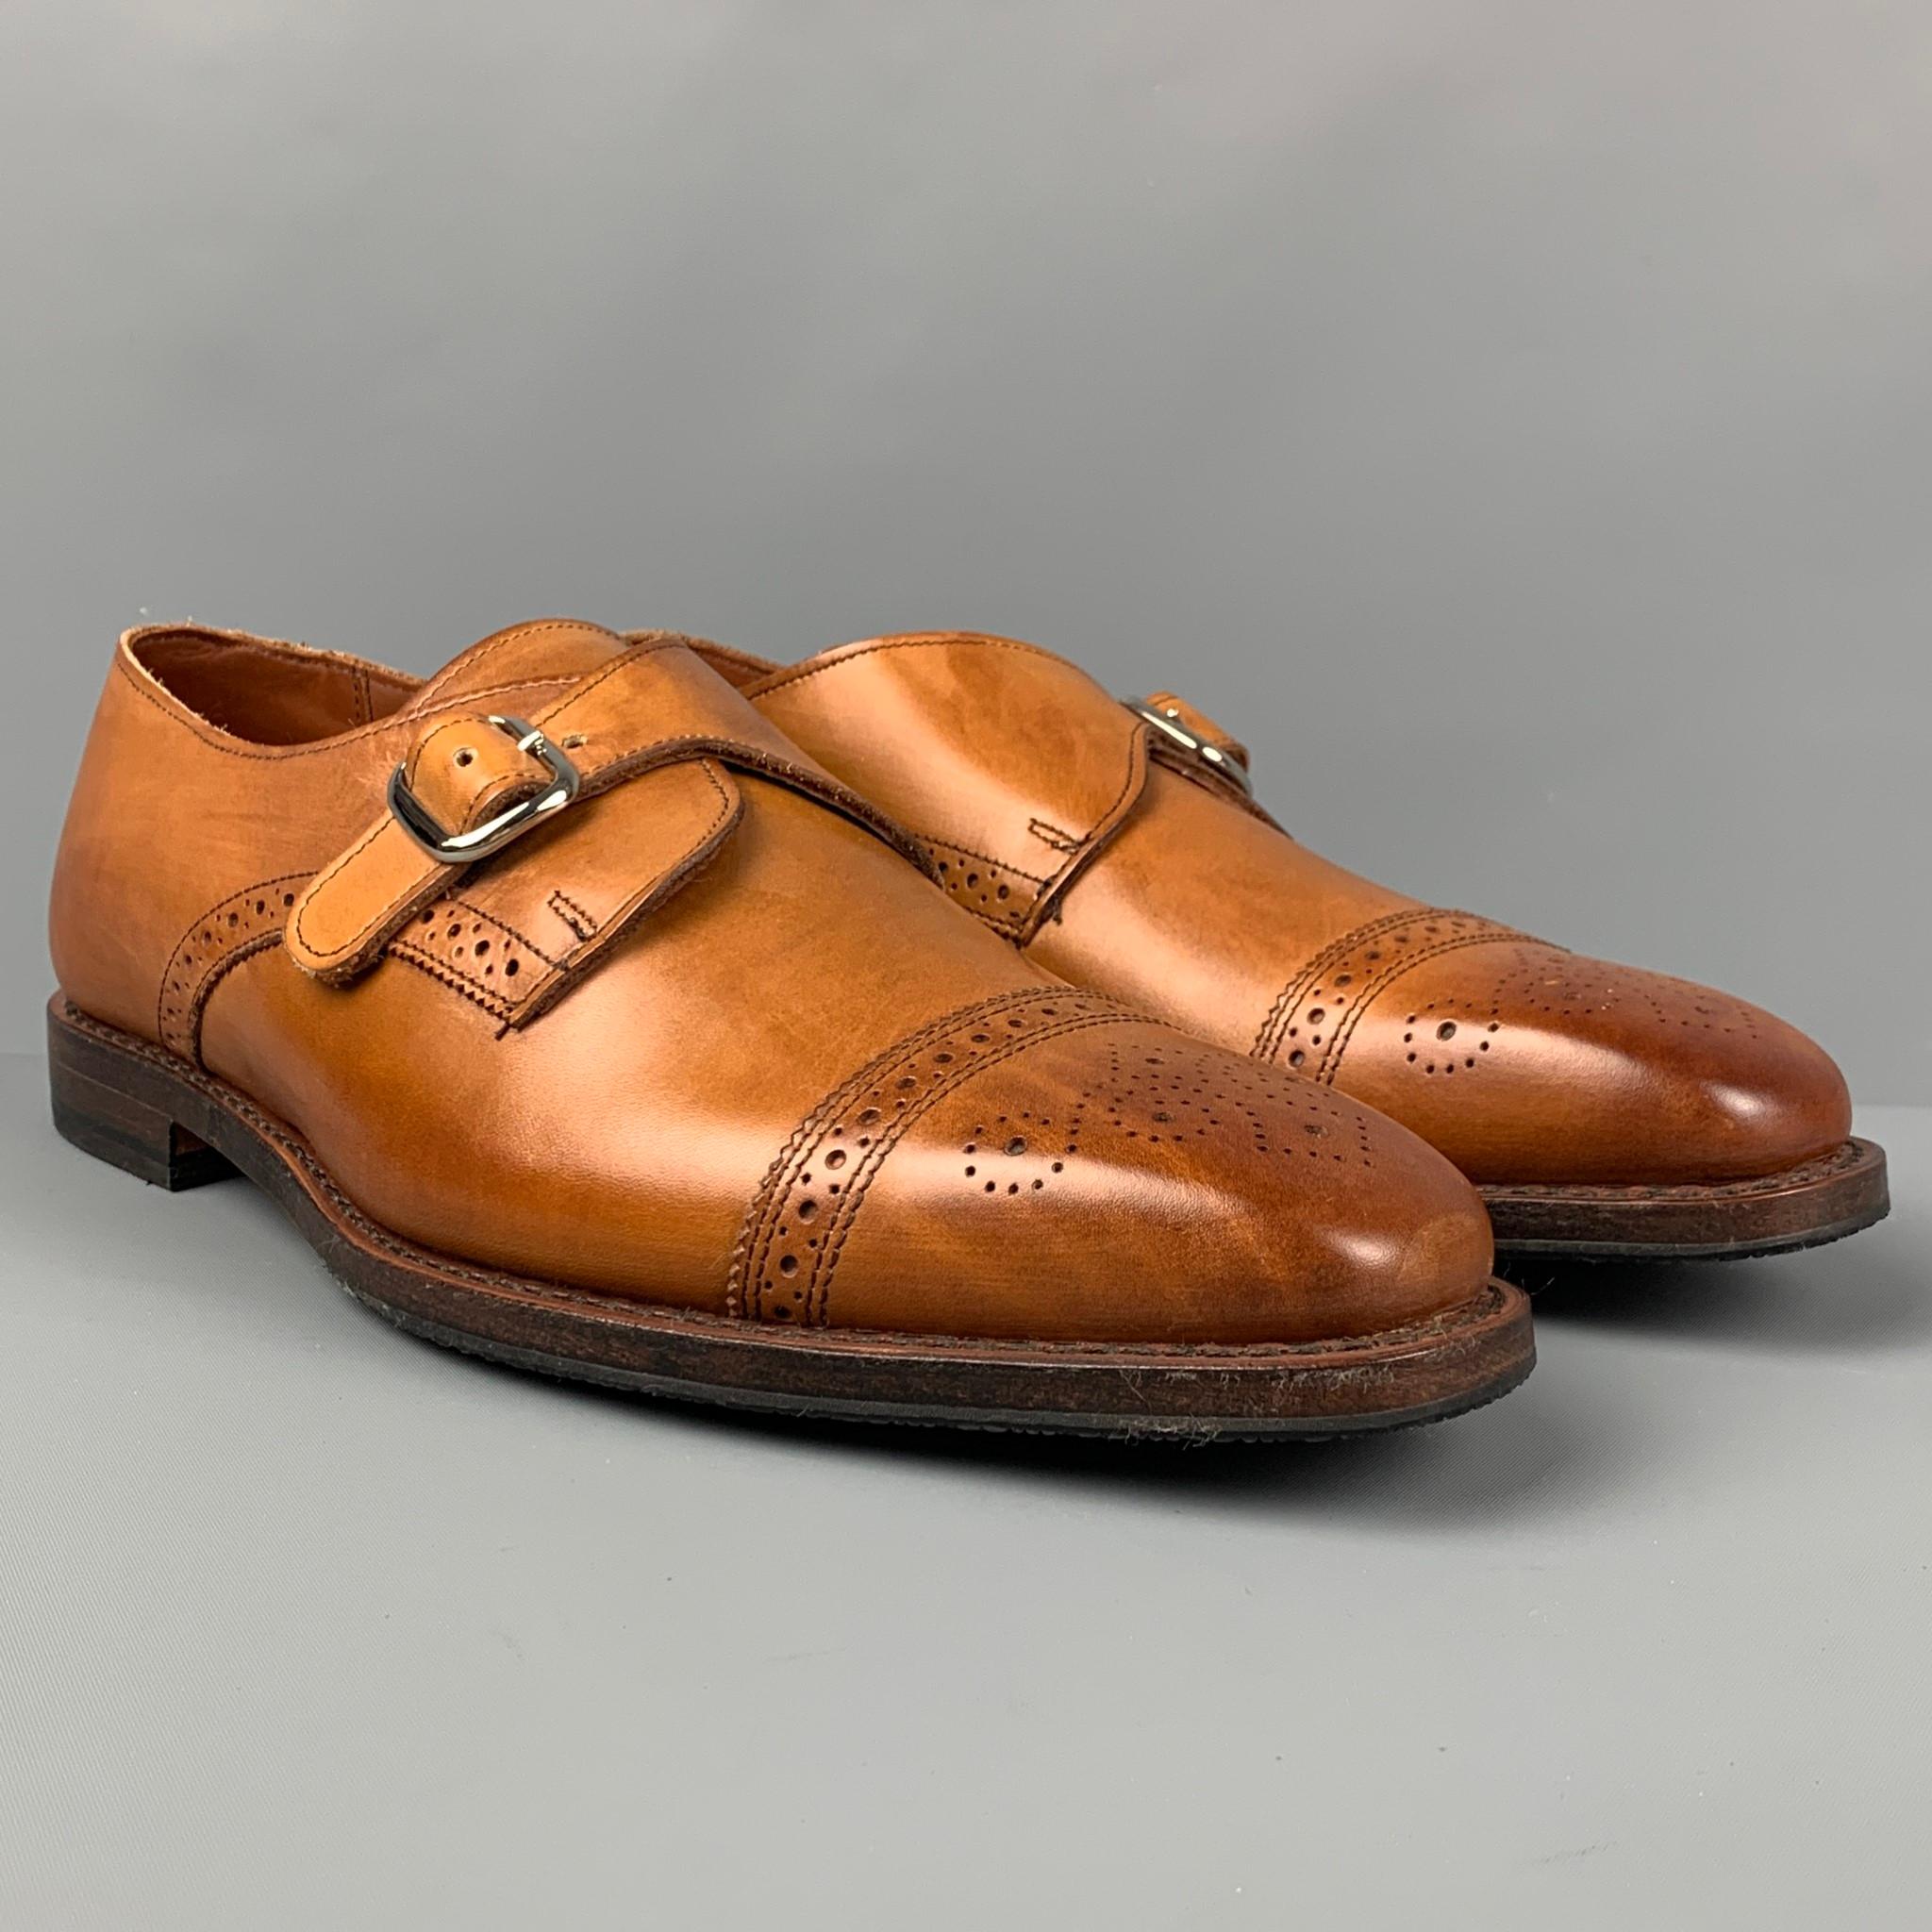 ALLEN EDMONDS 'Franciscan' shoes comes in a tan perforated leather featuring a monk strap closure and a square toe. Made in USA. 

Excellent Pre-Owned Condition.
Marked: 10

Outsole: 12.5 in. x 4.5 in. 